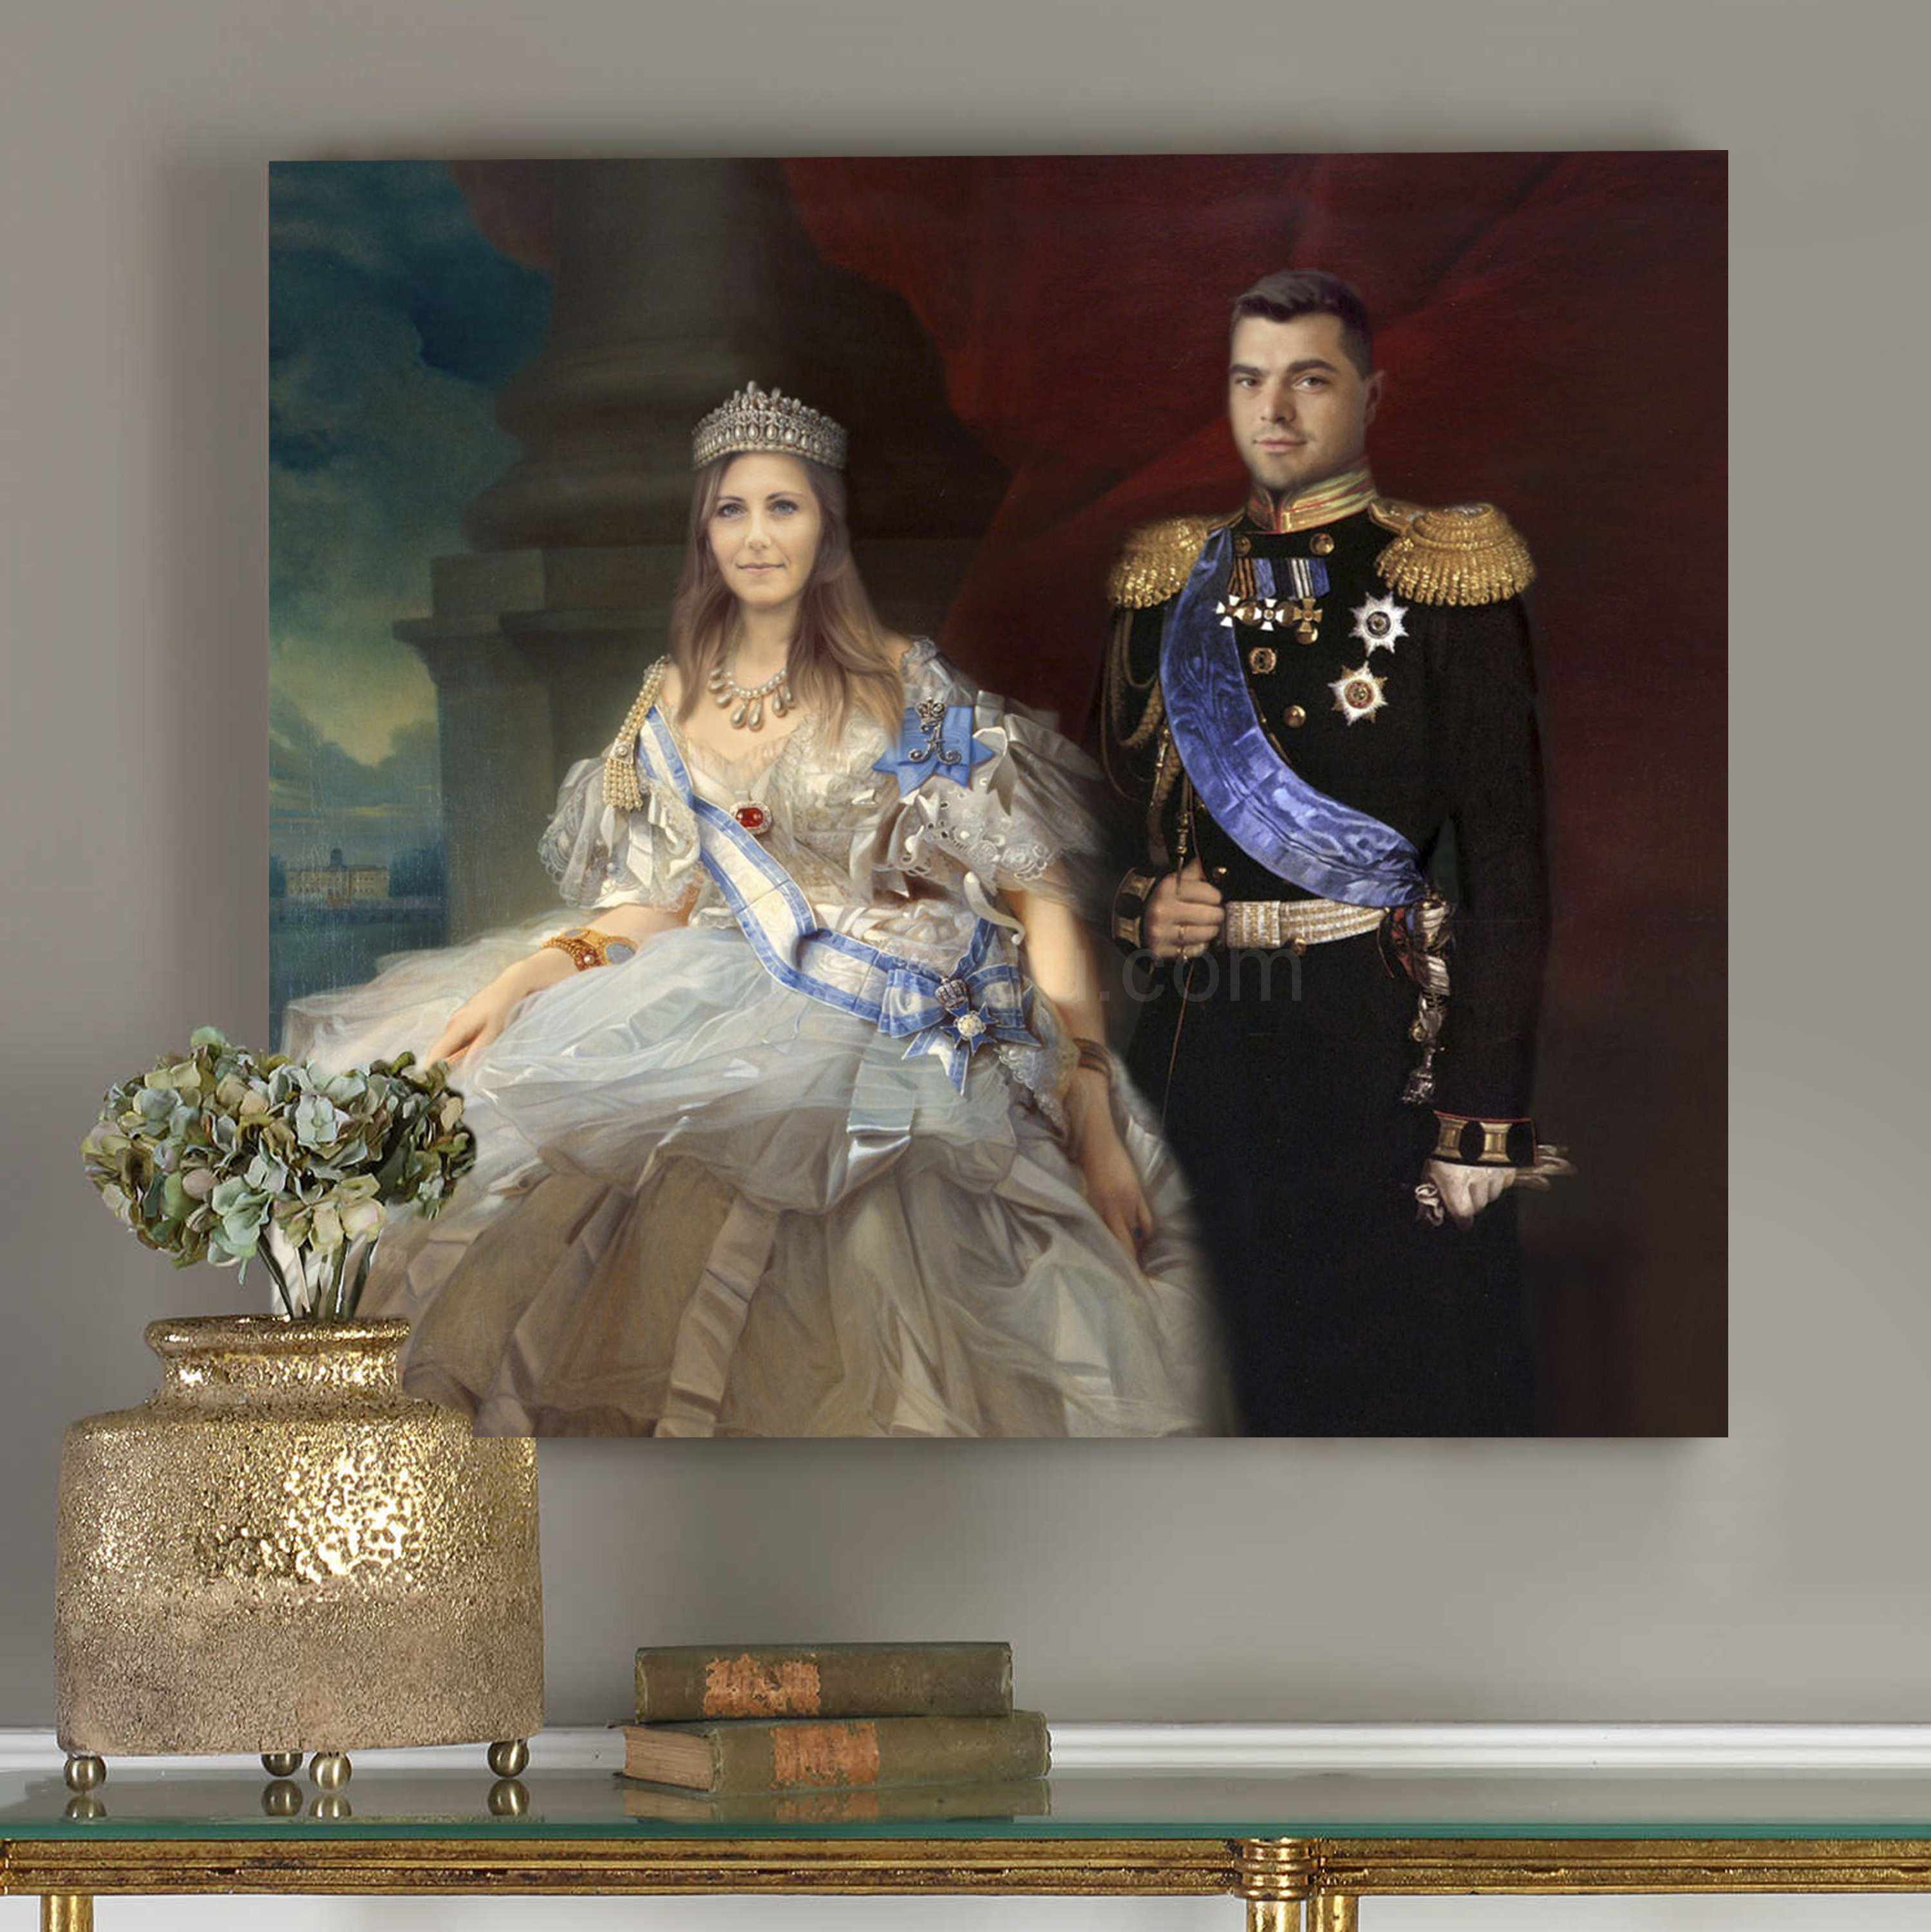 Portrait of a couple dressed in historical regal attires standing near red curtains hangs on a gray wall near a golden vase